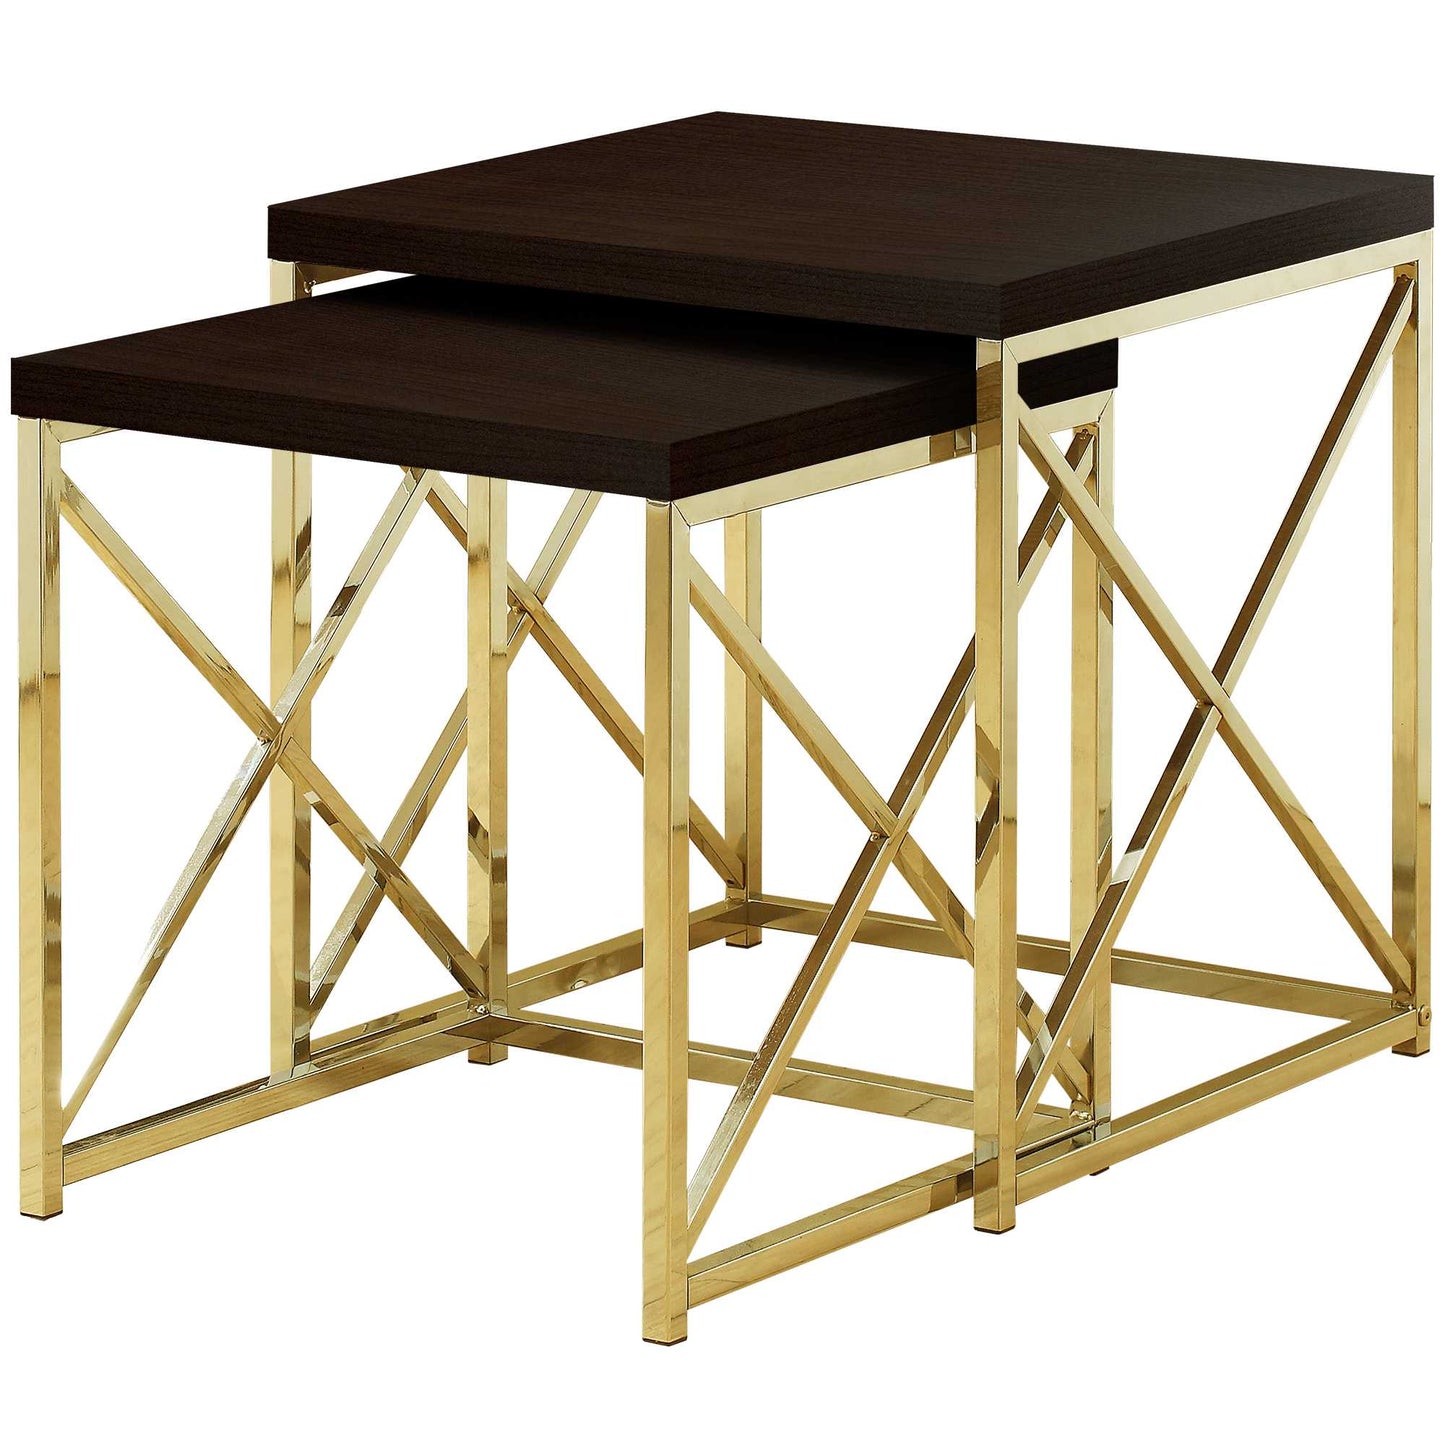 37.25" x 37.25" x 40.5" Cappuccino Gold Particle Board Metal 2pcs Nesting Table Set